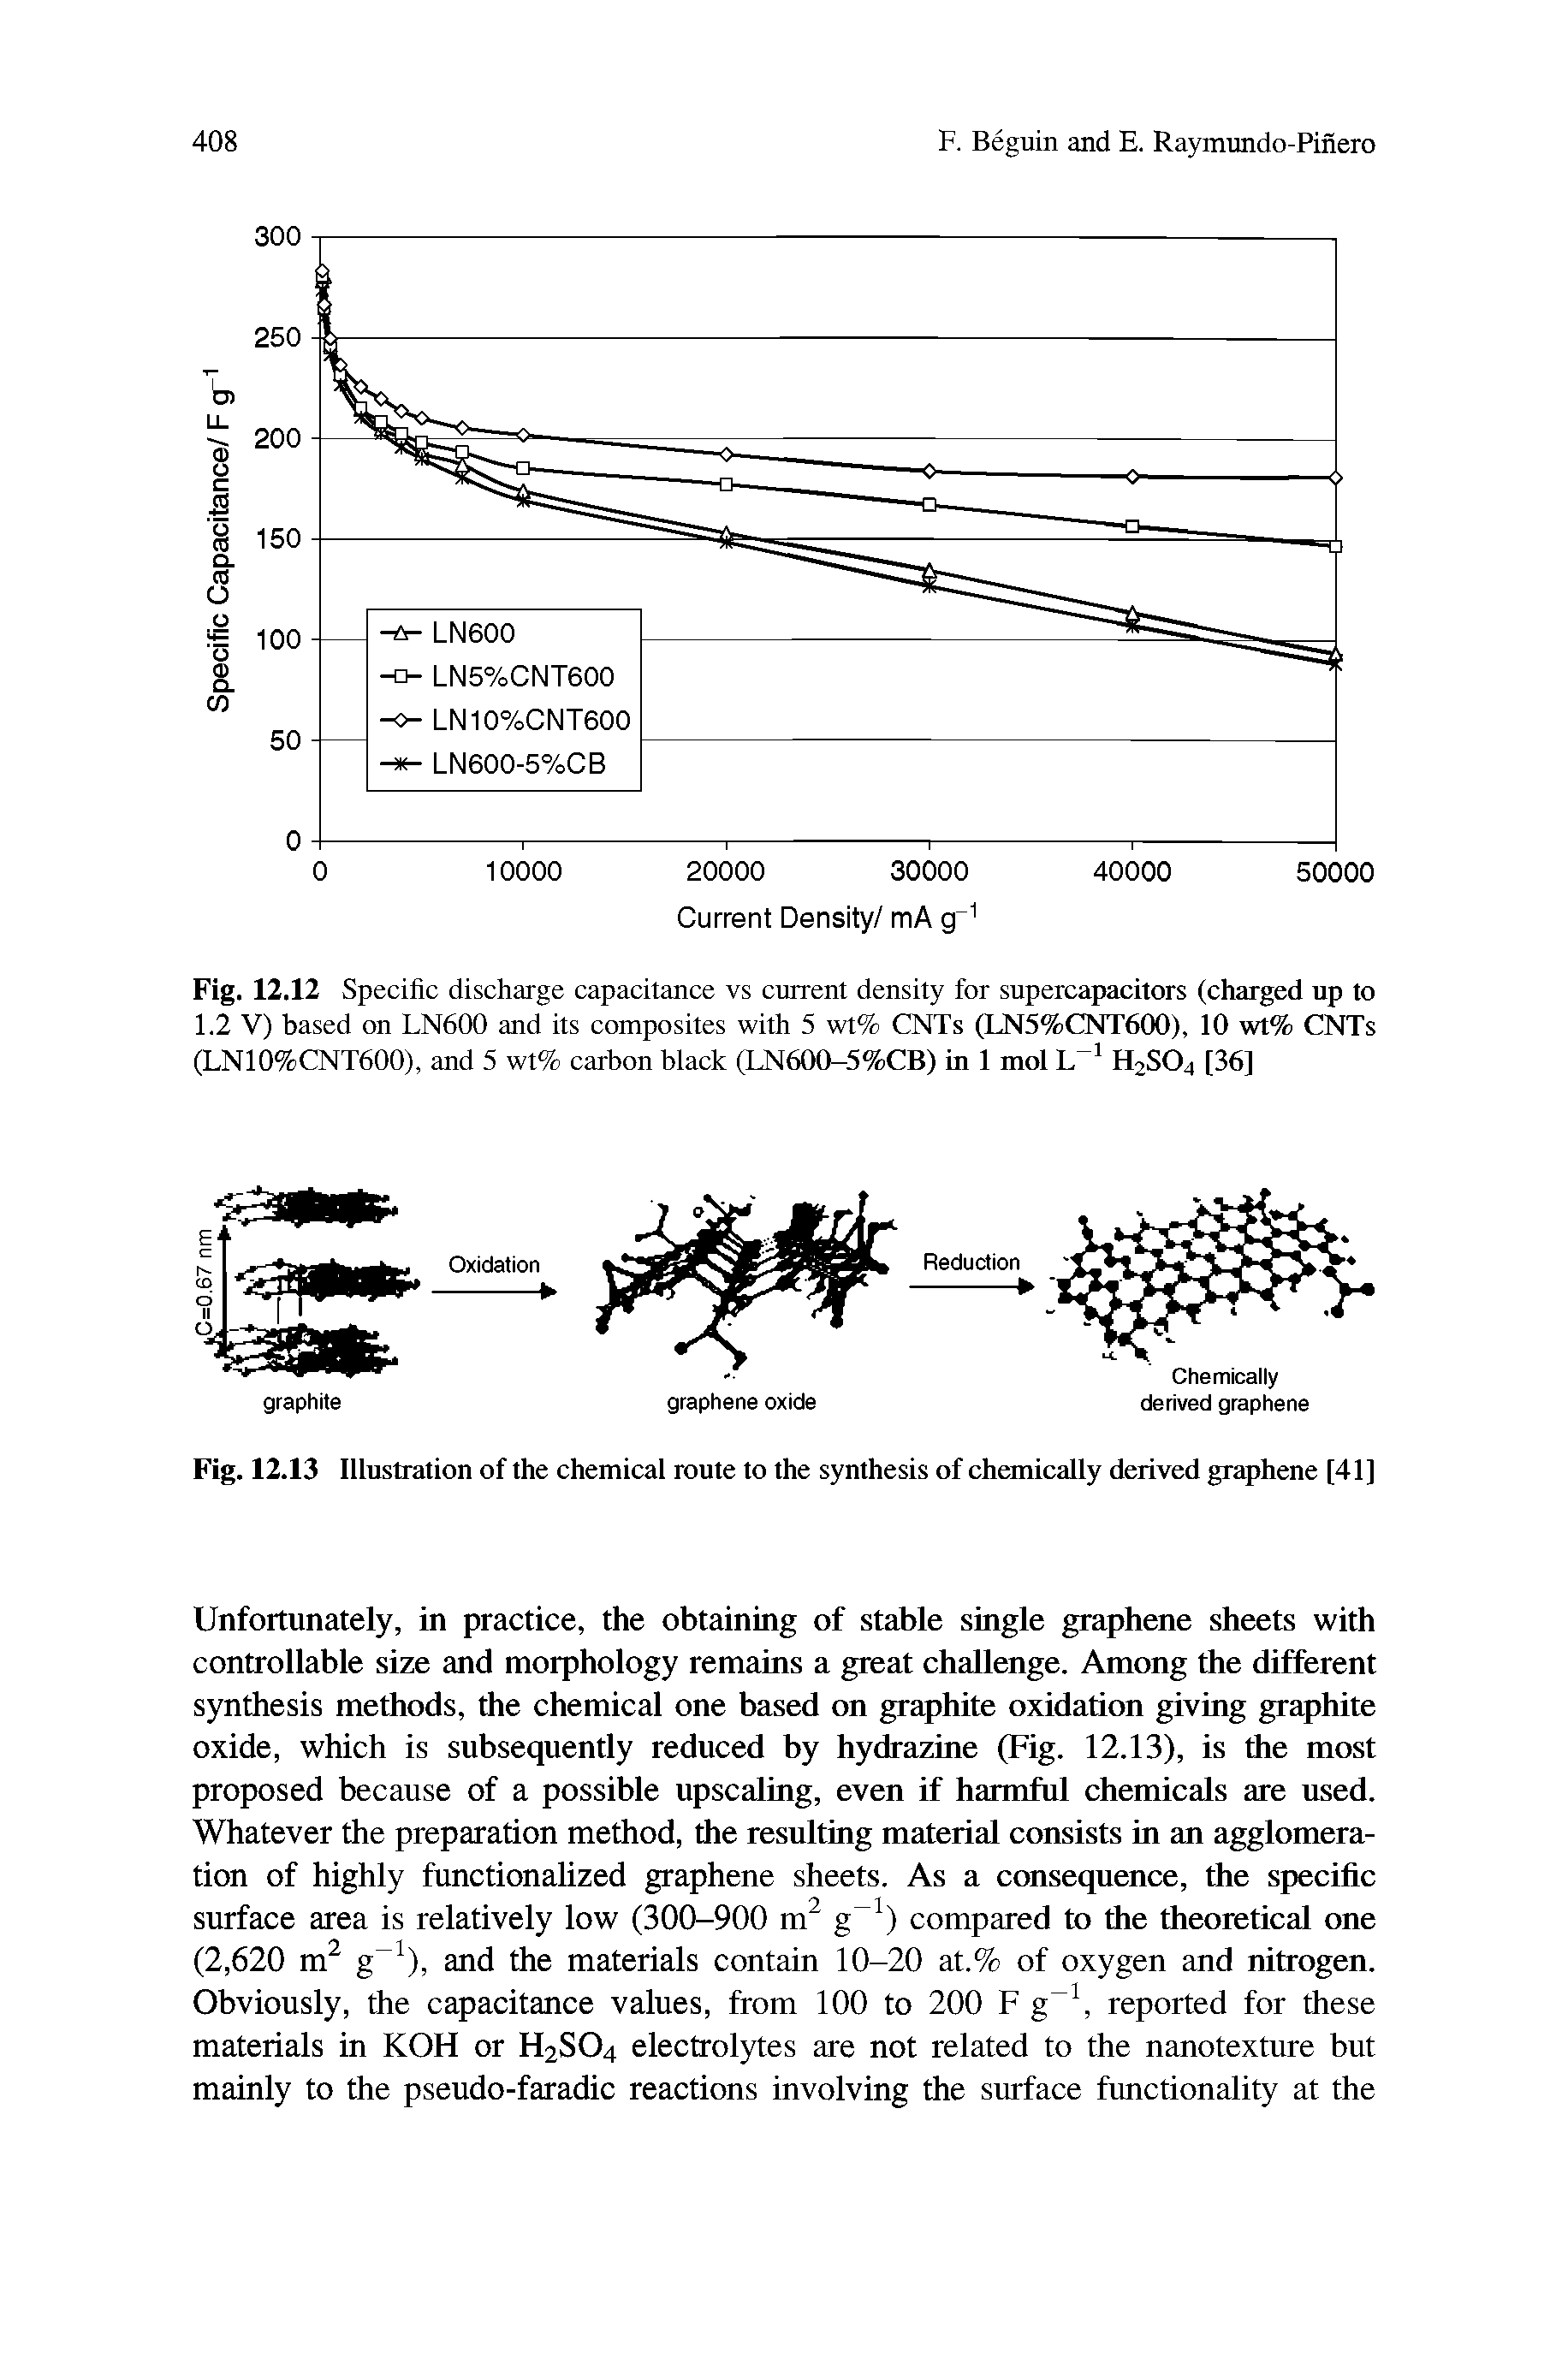 Fig. 12.12 Specific discharge capacitance vs current density for supercapacitors (charged up to 1.2 V) based on LN600 and its composites with 5 wt% CNTs (LN5%CNT600), 10 wt% CNTs (LN10%CNT600), and 5 wt% carbon black (LN600-5%CB) in 1 mol H2SO4 [36]...